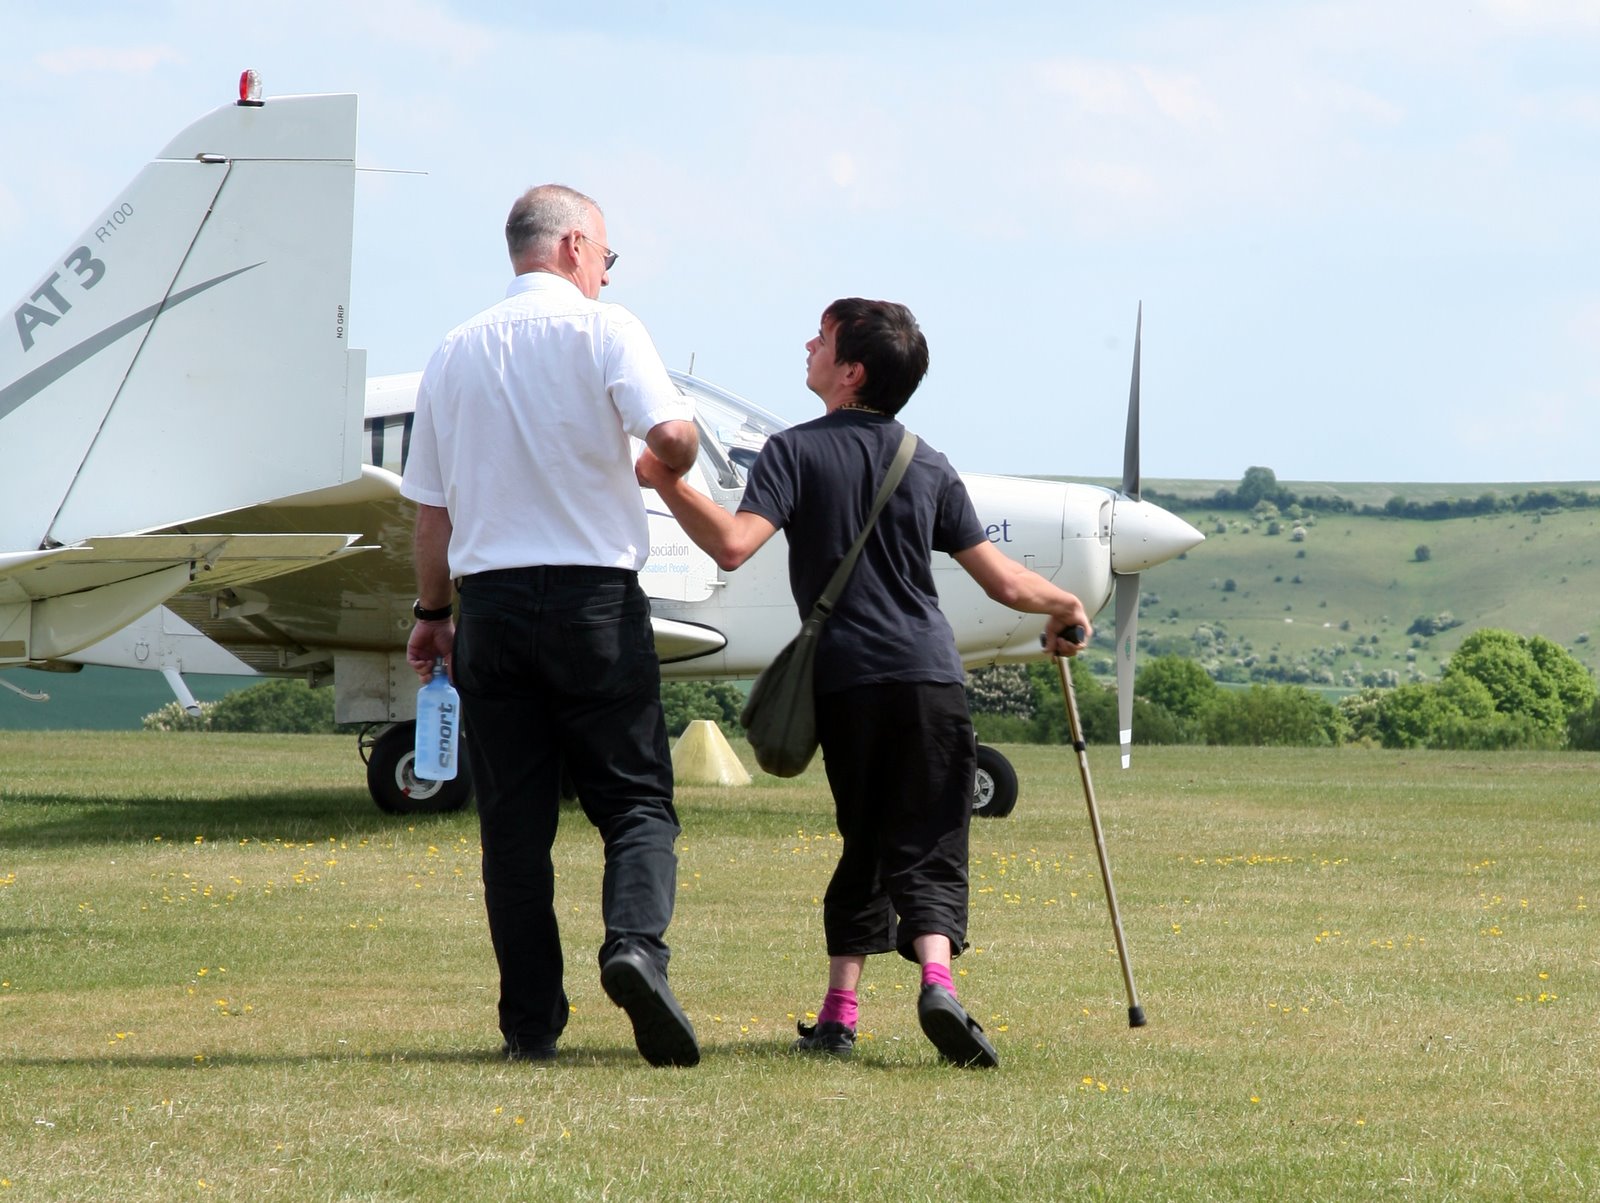 Aerobility, Flynqy and Cornwall Airport provide fliying lessons for people with disabilities